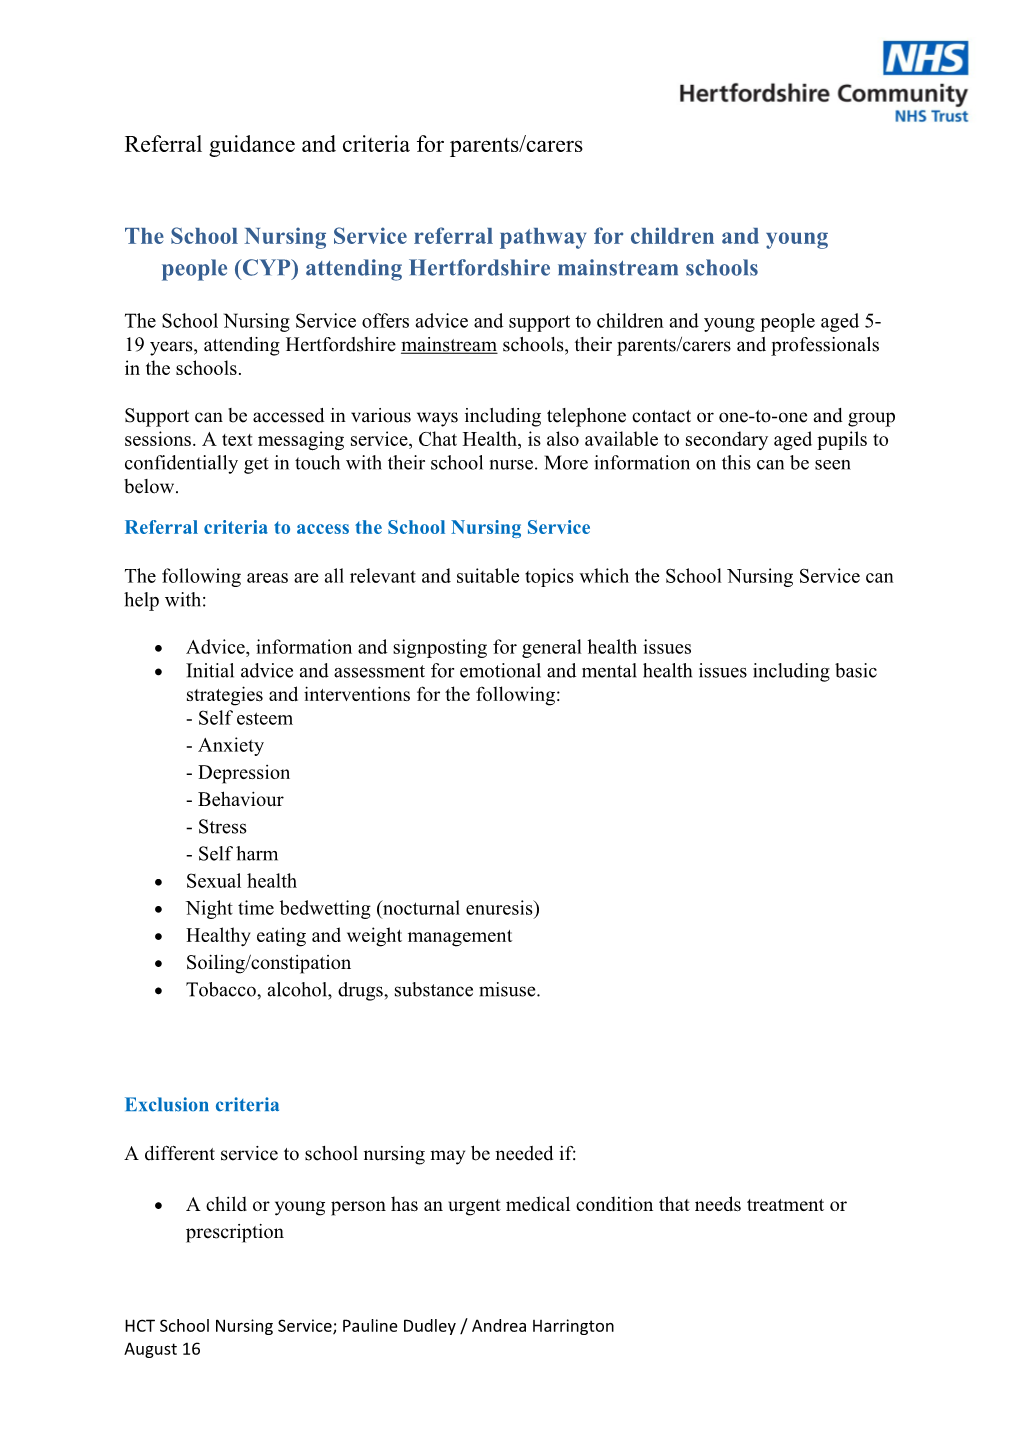 Referral Guidance and Criteria for Parents/Carers